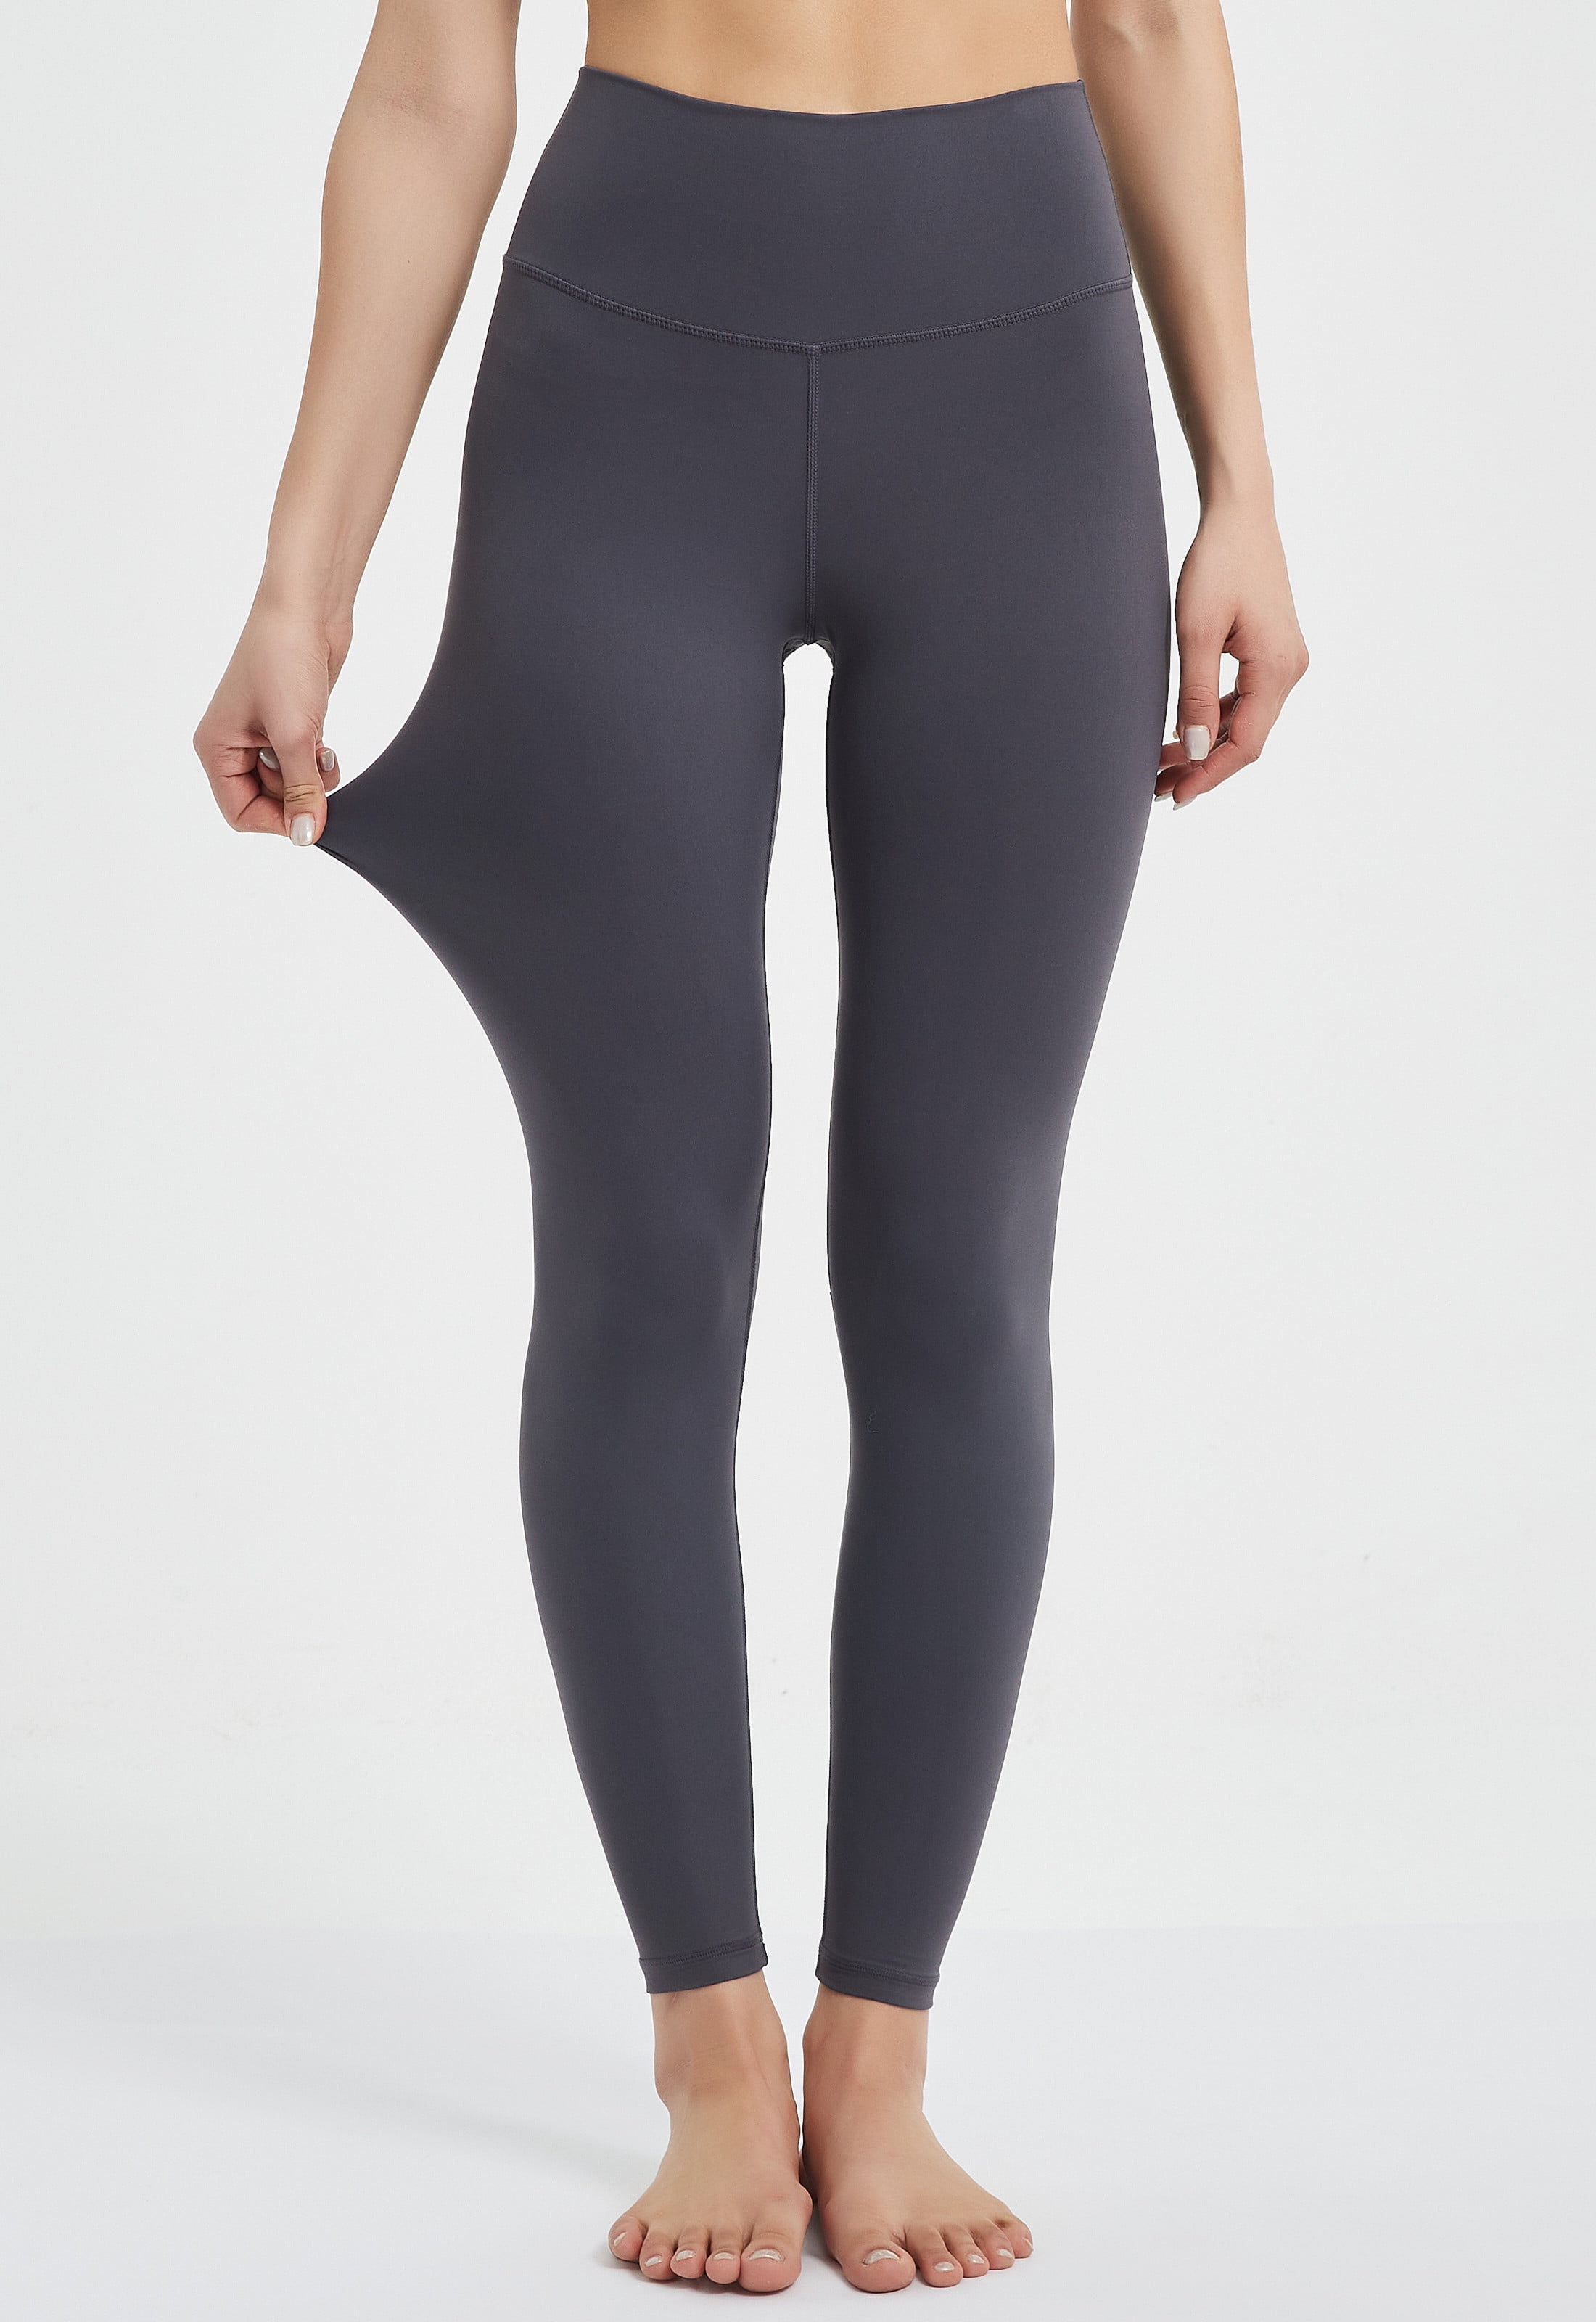 High Waisted Leggings in Super Soft Full Length Opaque Slim perfect for Yoga  Tummy Control Non See-Through Workout Pants